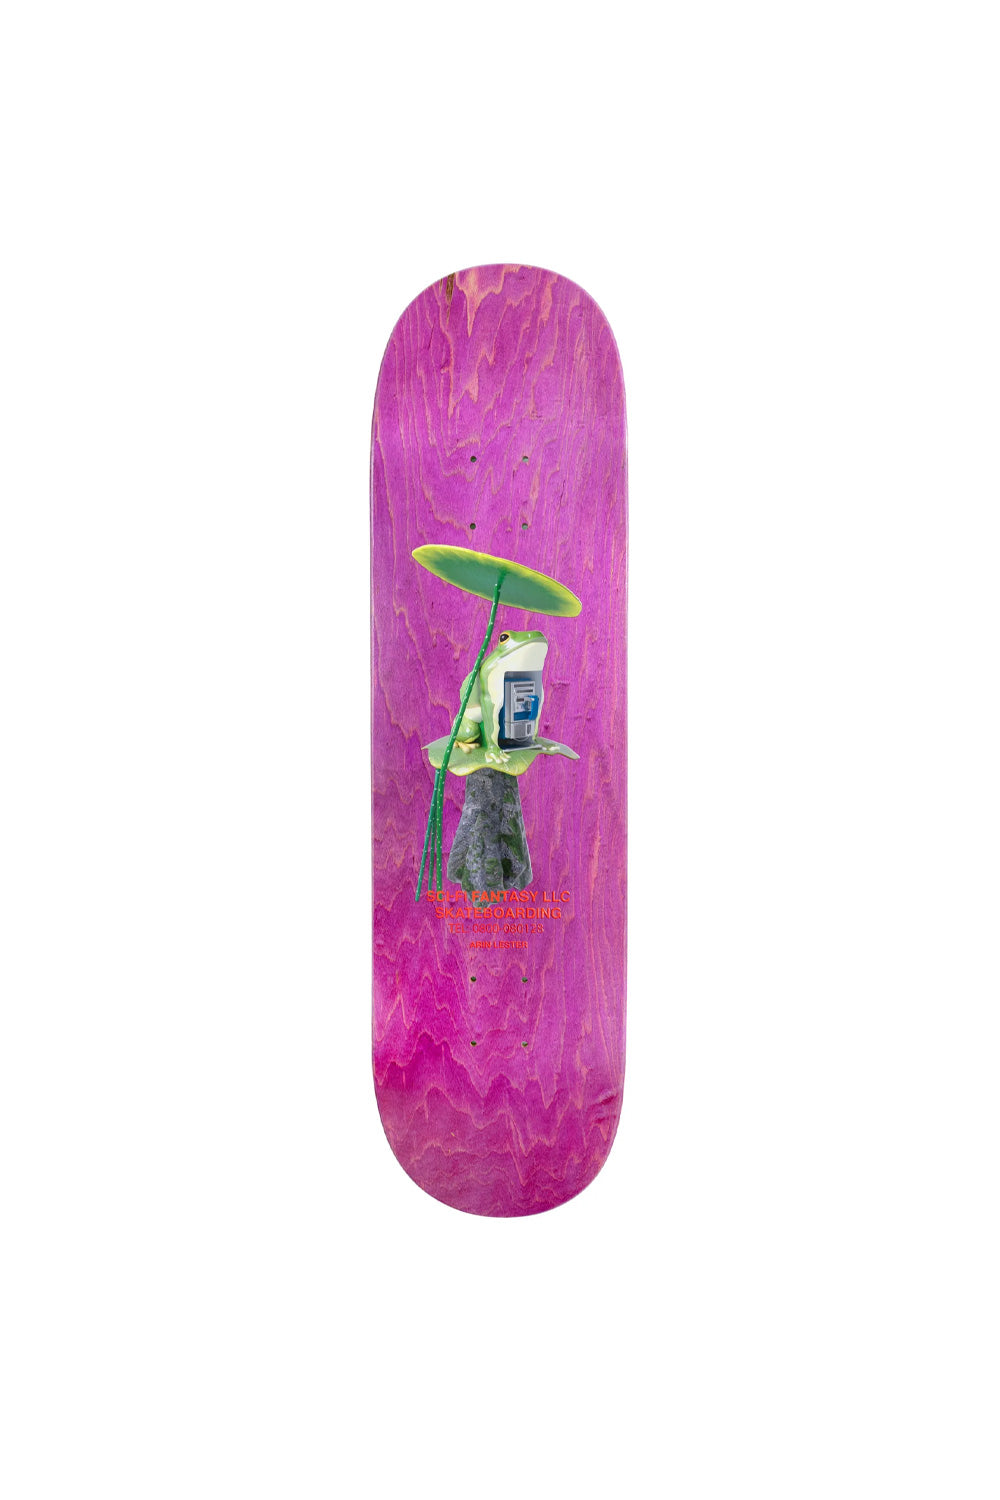 Sci-Fi Fantasy Arin Lester Pay Frog Deck 8,25" - BONKERS